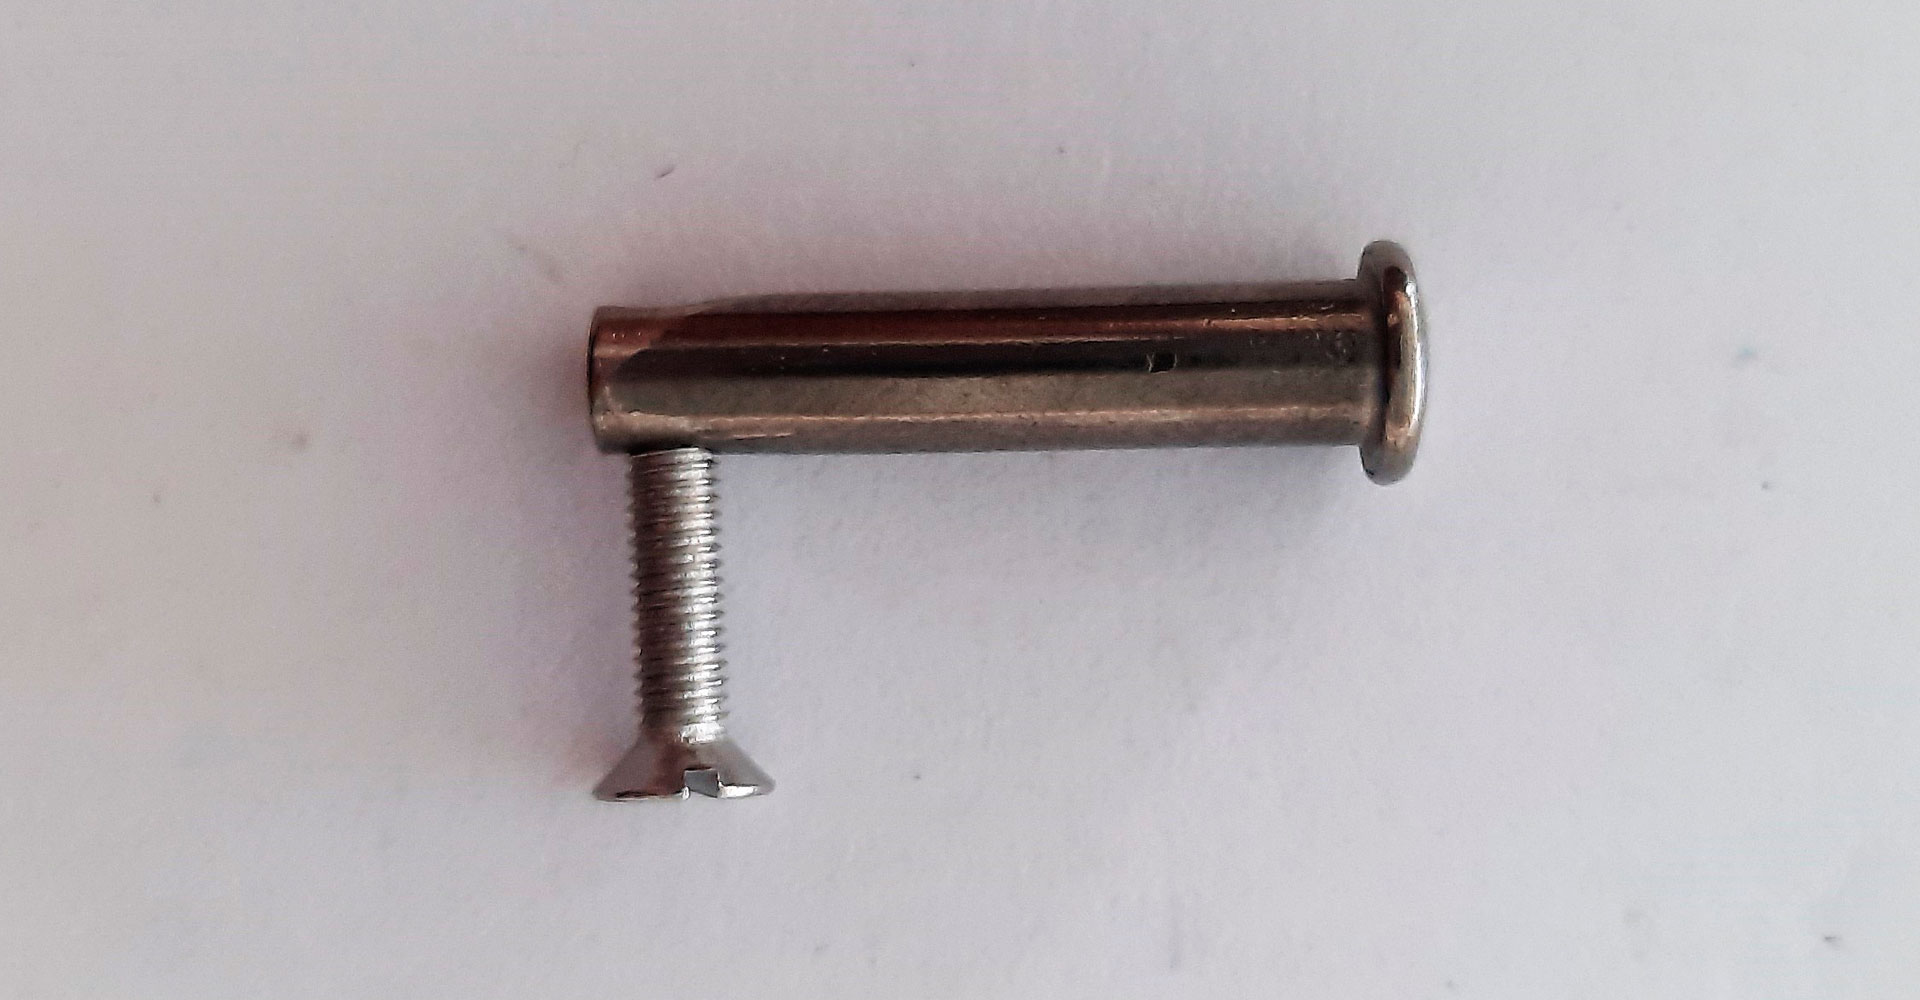 Art 428 – Spreaders pin with screw